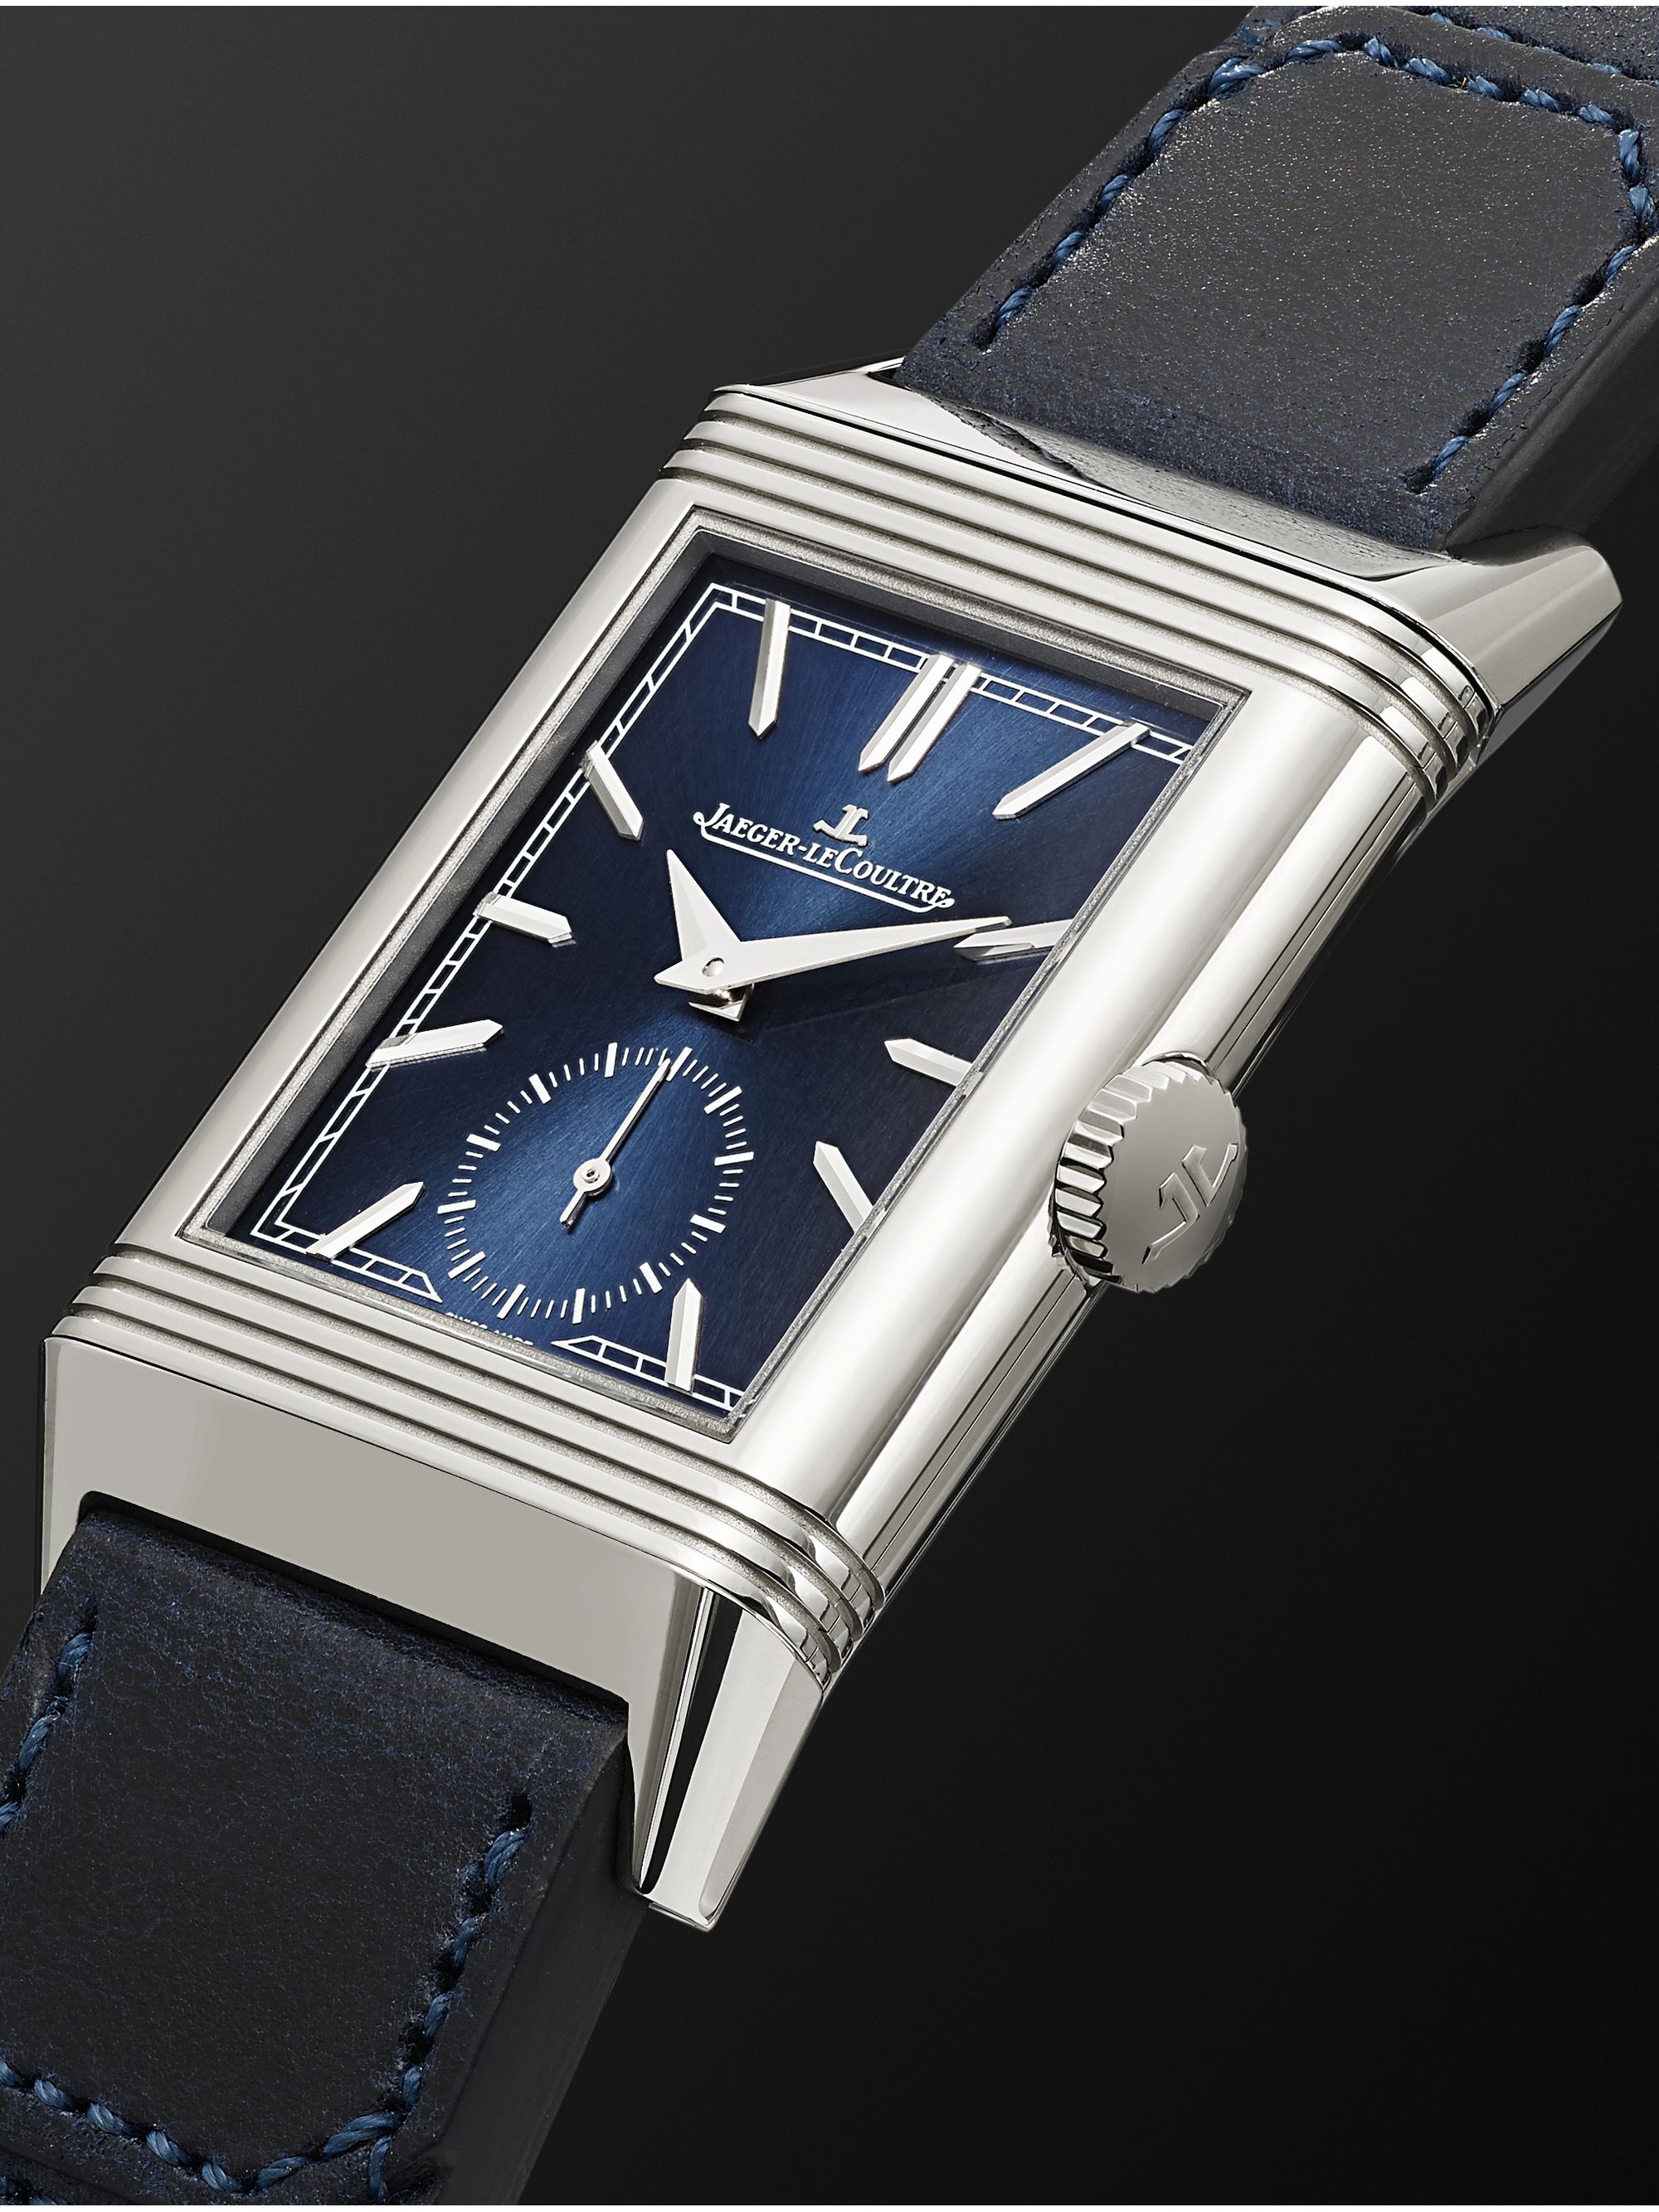 JAEGER-LECOULTRE Reverso Tribute Hand-Wound 45mm x 27mm Stainless Steel and Leather Watch, Ref. No. Q3978480